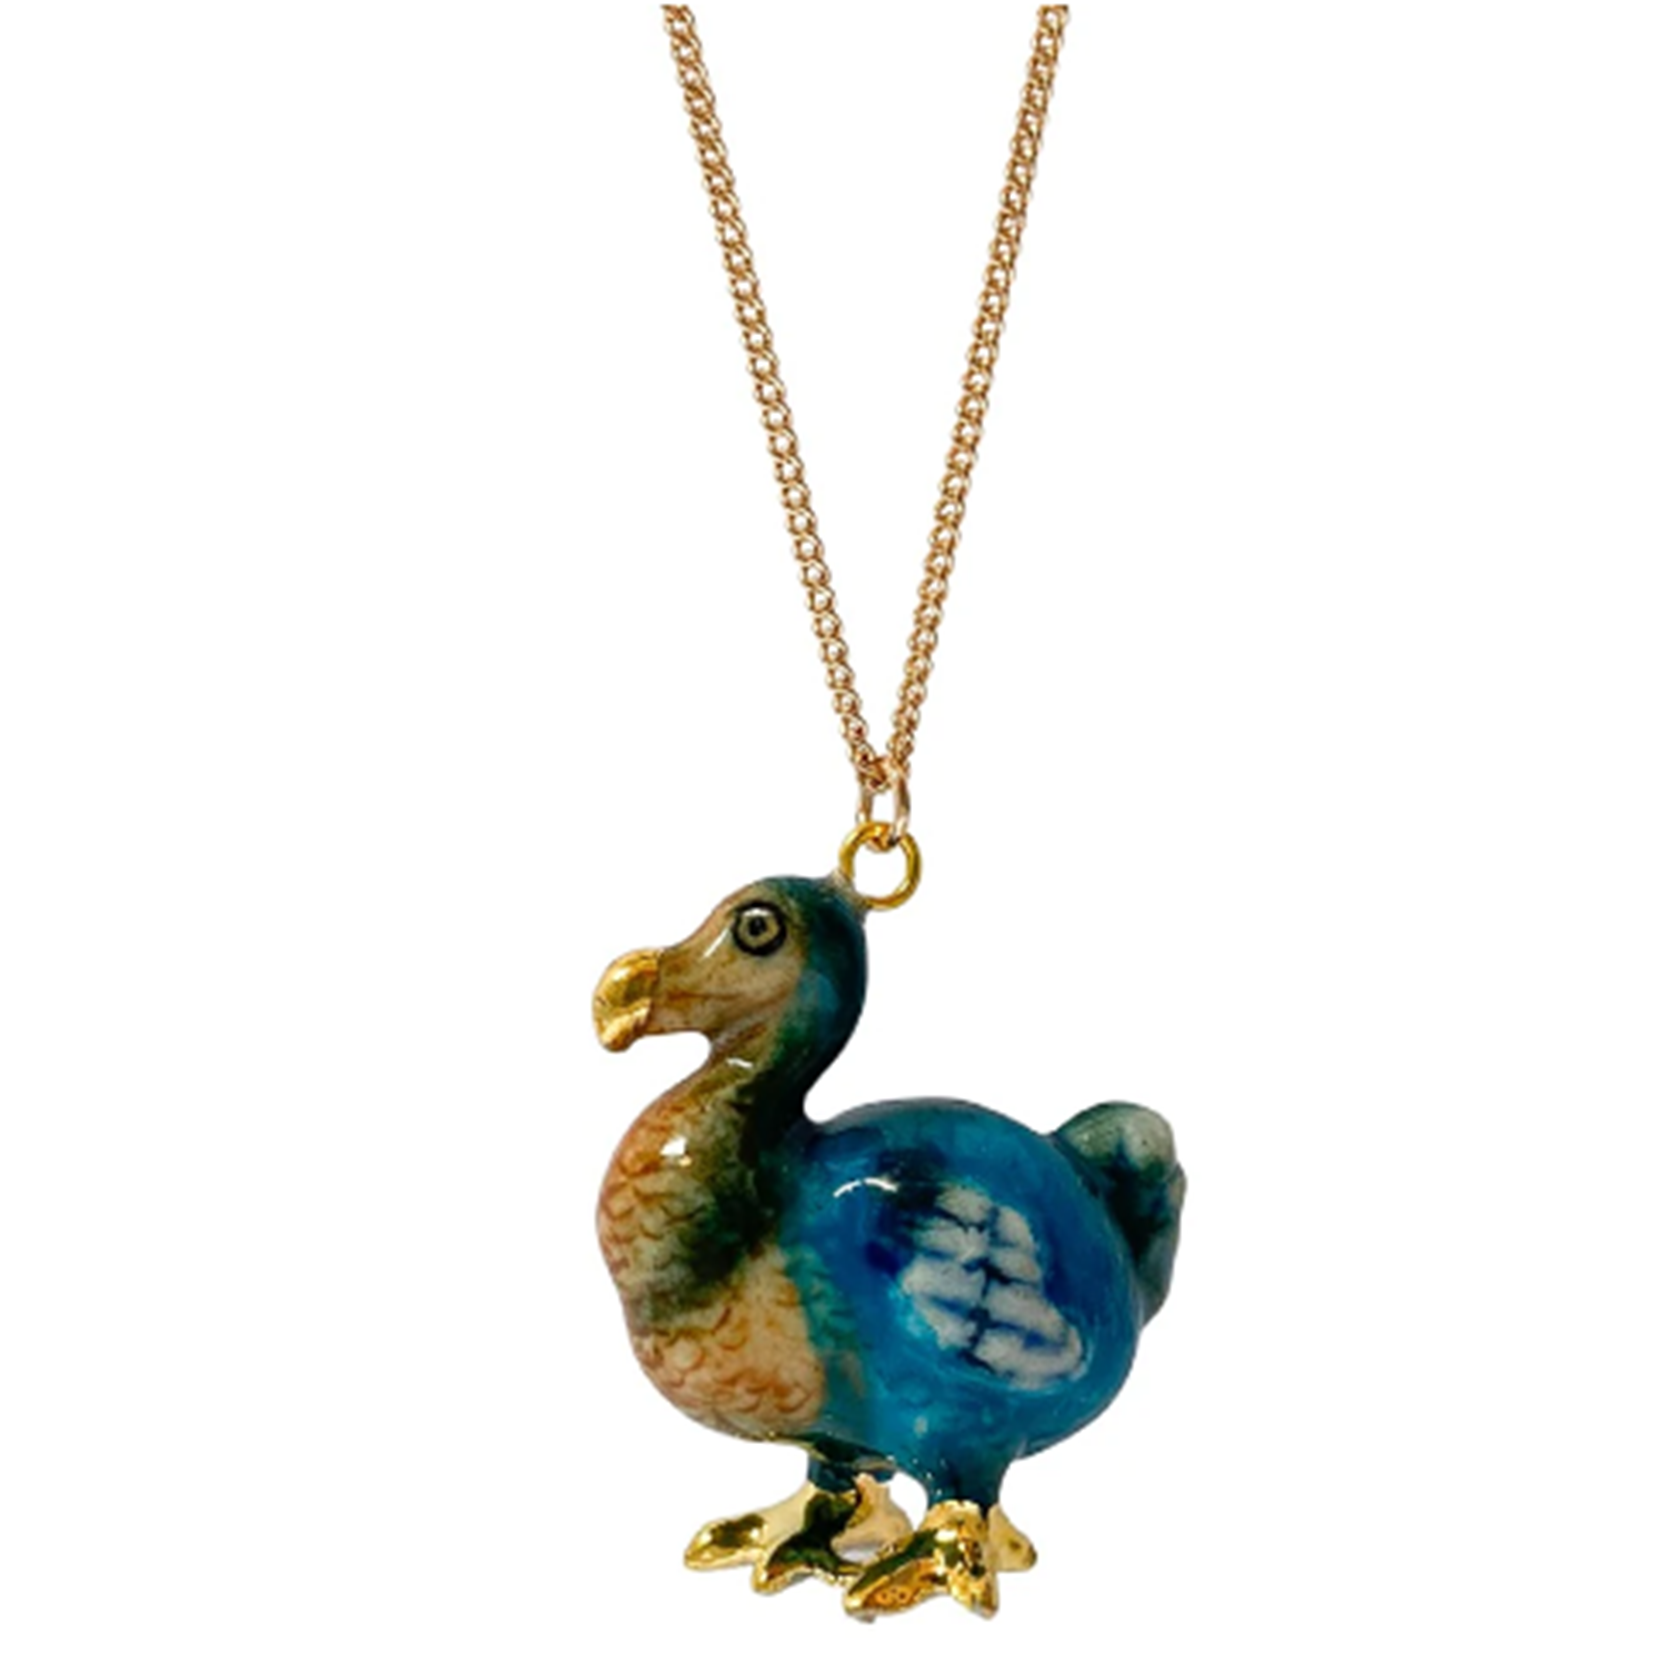 Teal and Gold Dodo Necklace